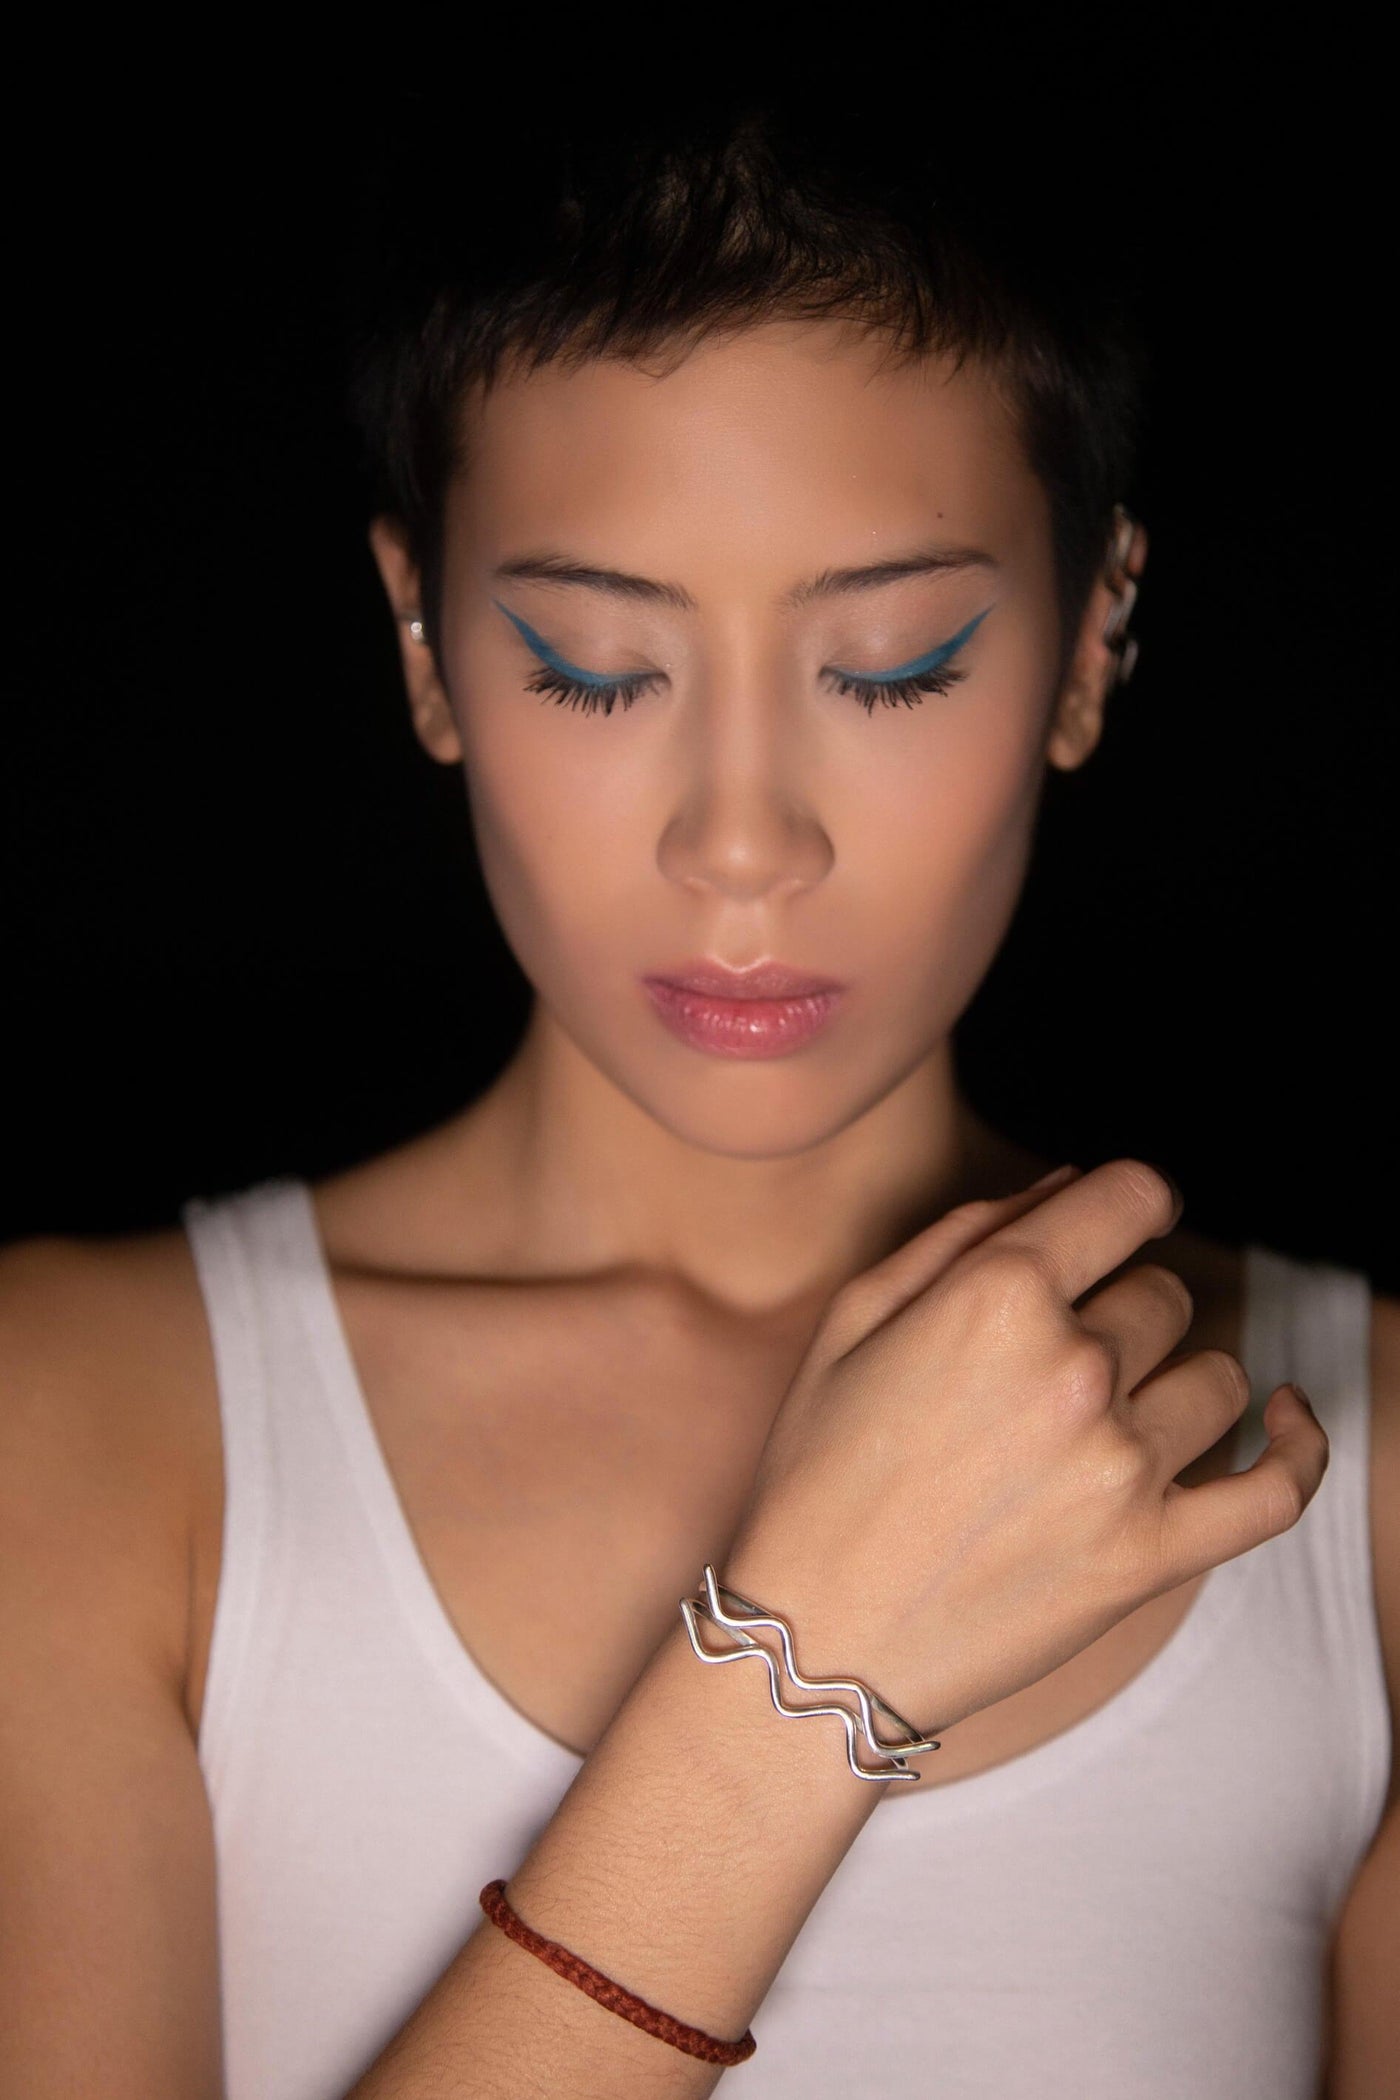 Aquarius zodiac sign minimalist bracelet, fully and ethically handmade of Sterling Silver 925.  